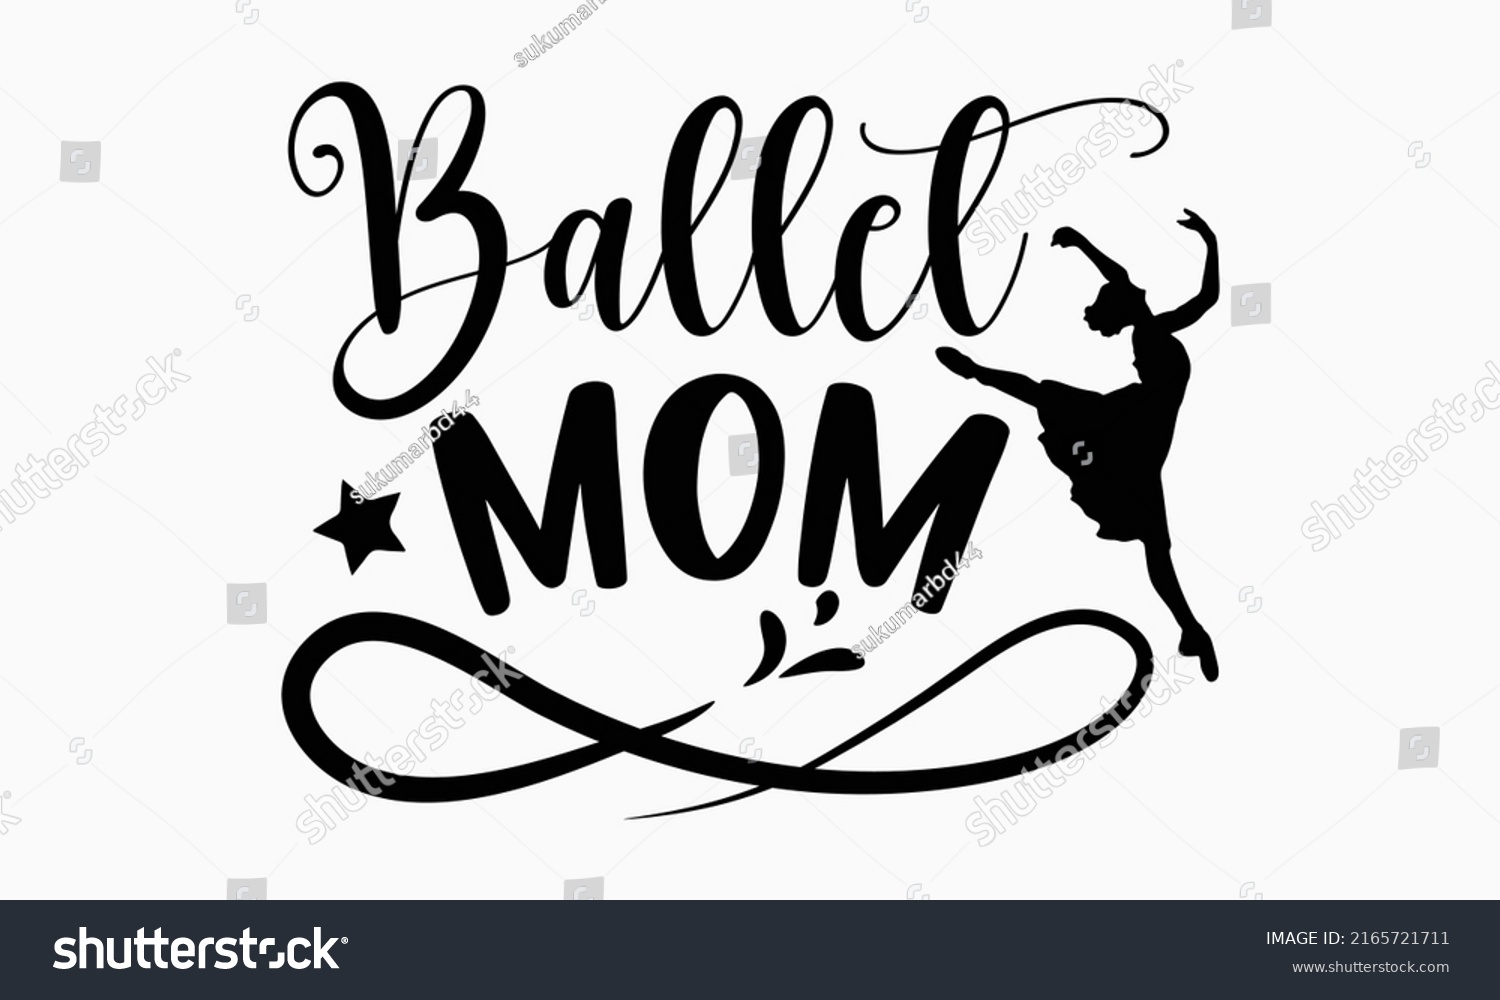 SVG of Ballet mom - Ballet t shirt design, Hand drawn lettering phrase, Calligraphy graphic design, SVG Files for Cutting Cricut and Silhouette svg